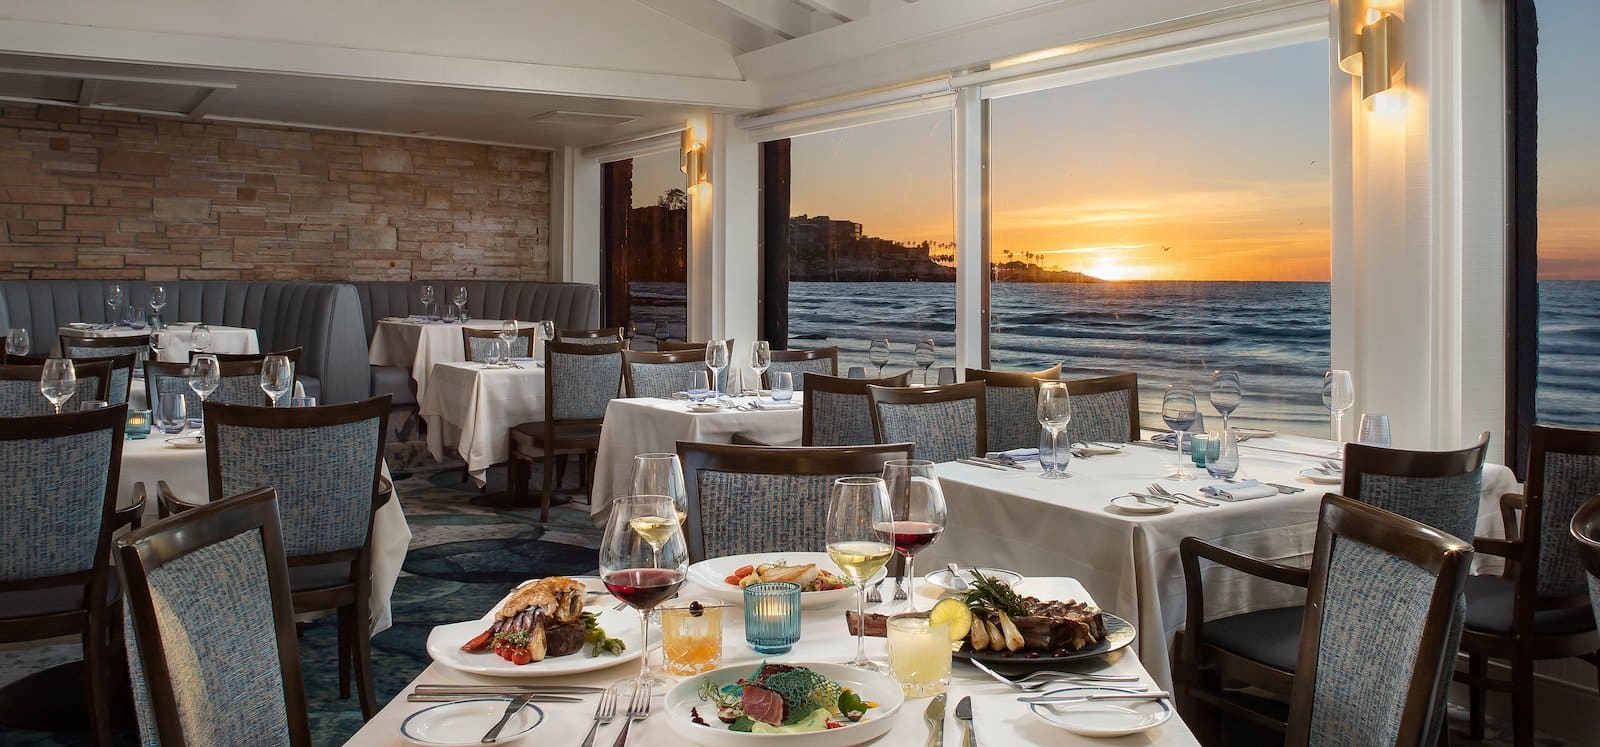 Fine dining restaurant "The Marine Room" with stunning ocean views